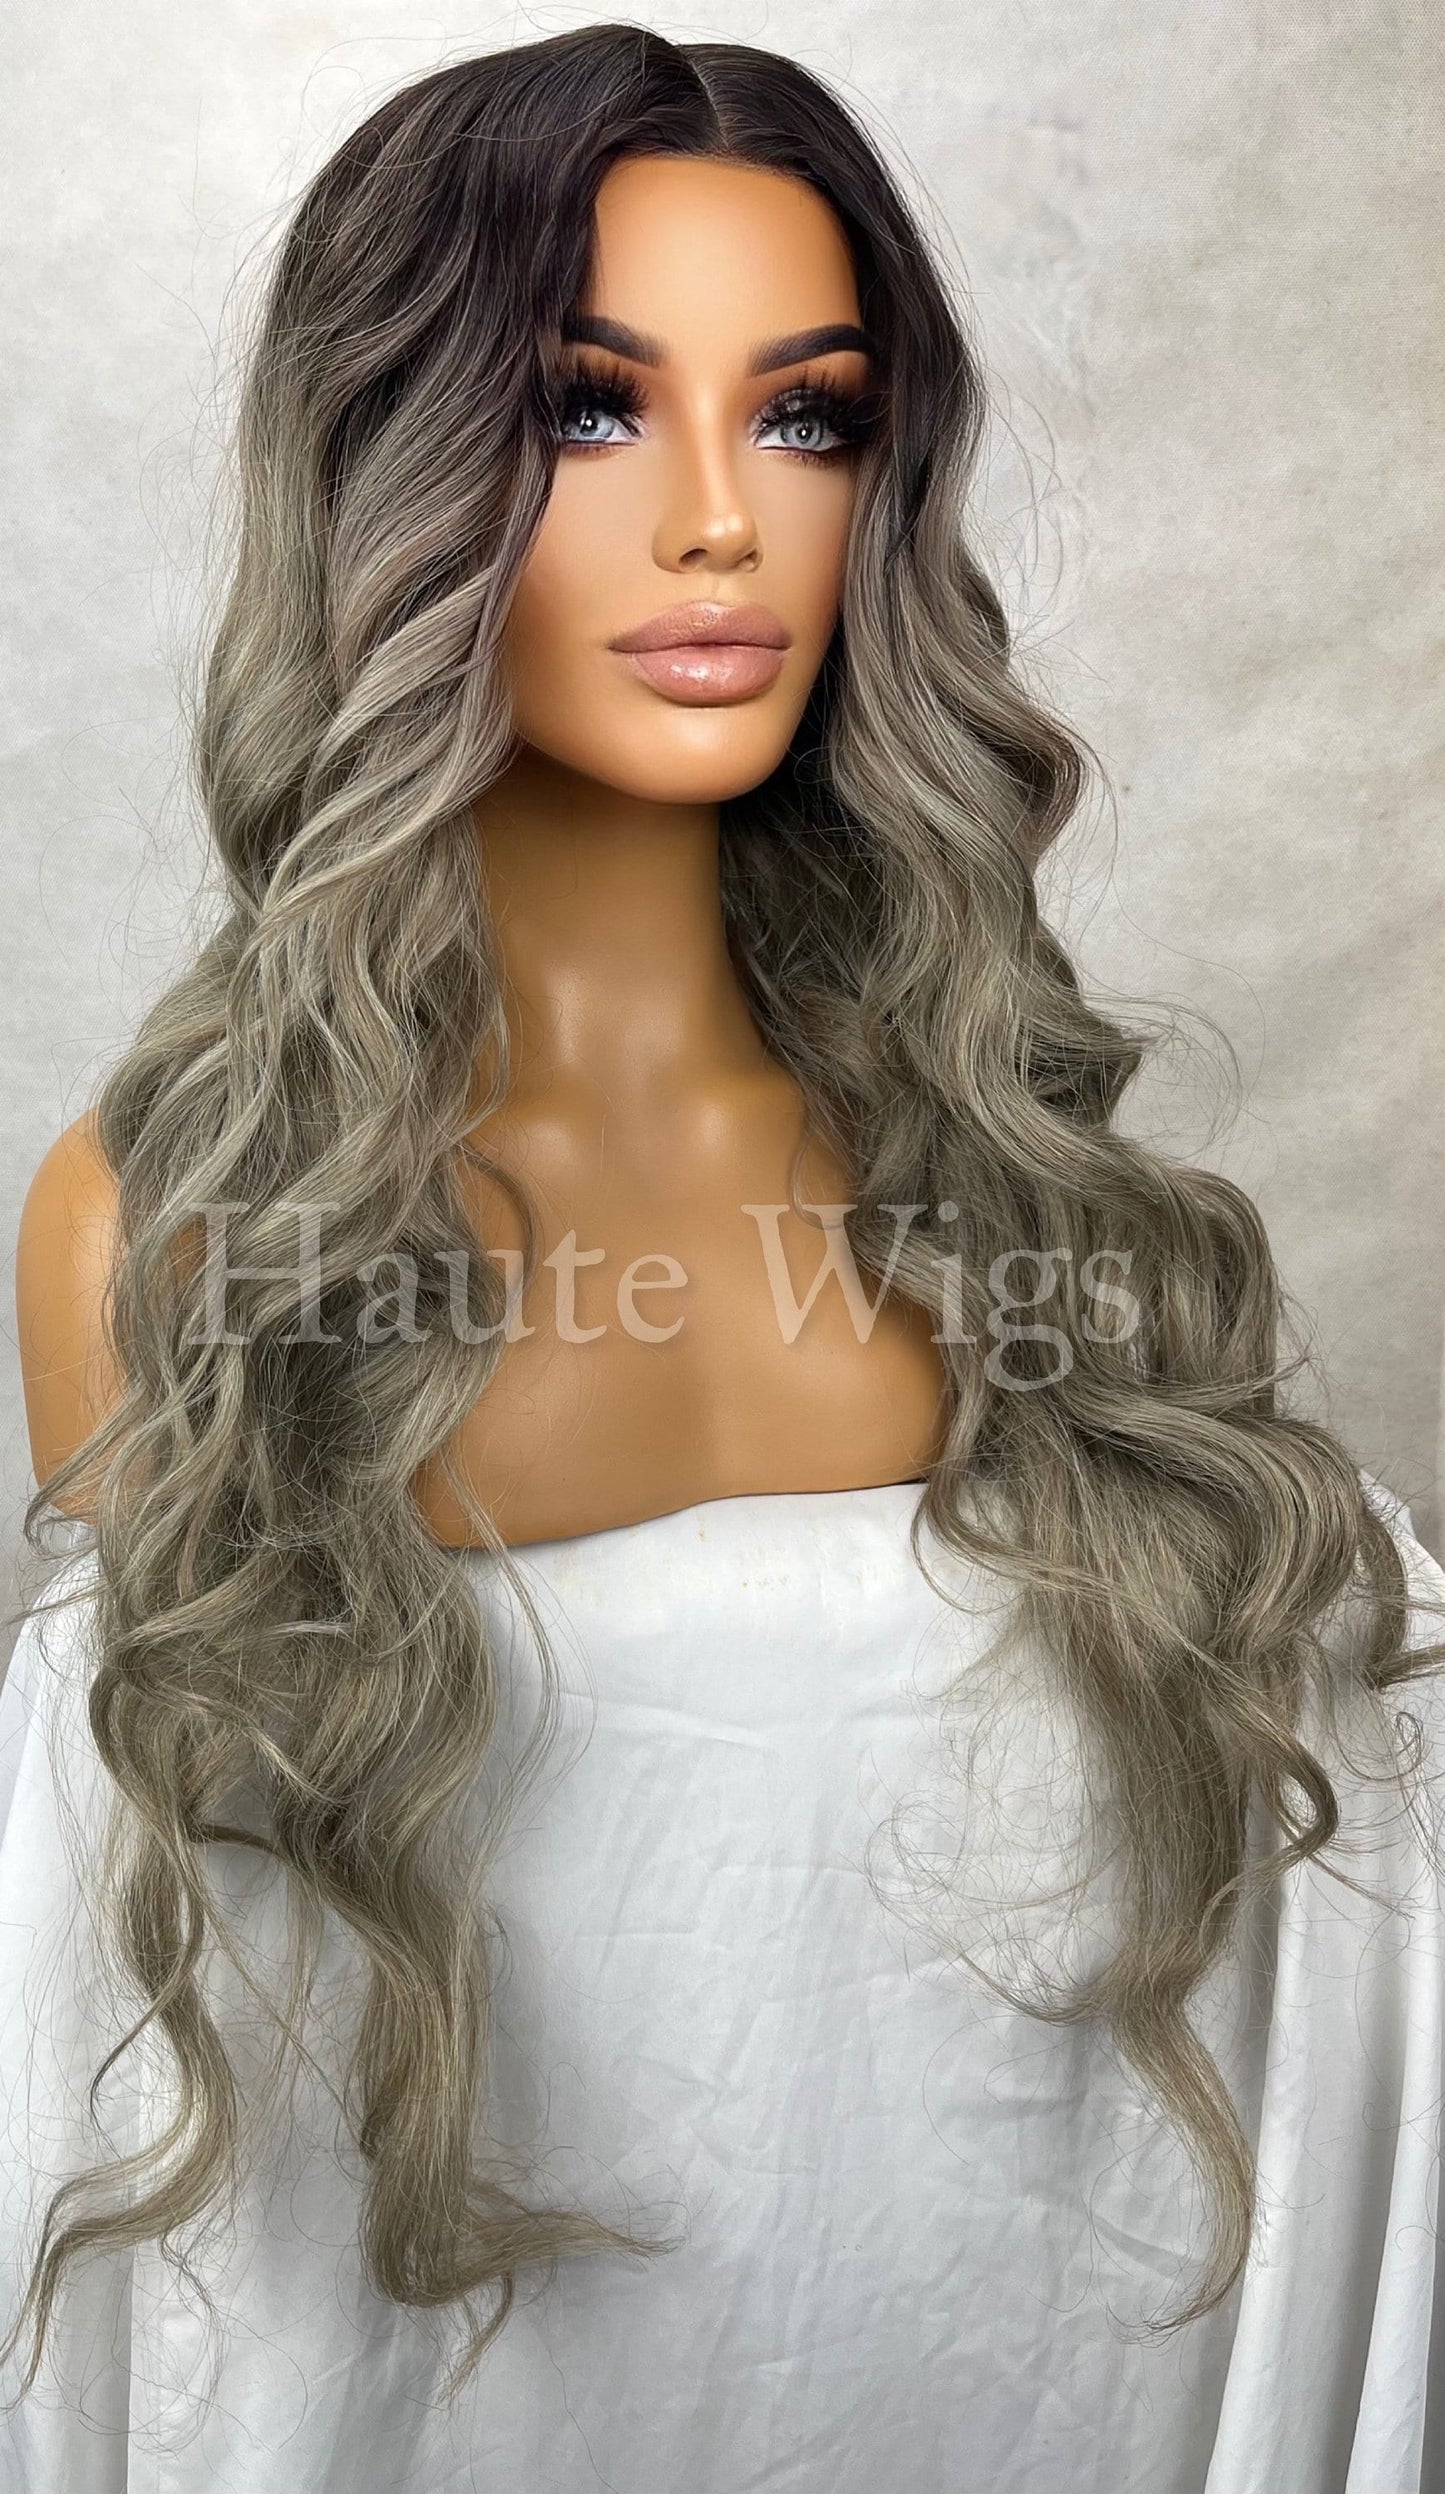 Pimlico - Ash Platinum silver Blonde Ombré 24 Inch Long Wig Wavy NO Lace Womens Wig Eye Catching Gift for her haute wigs